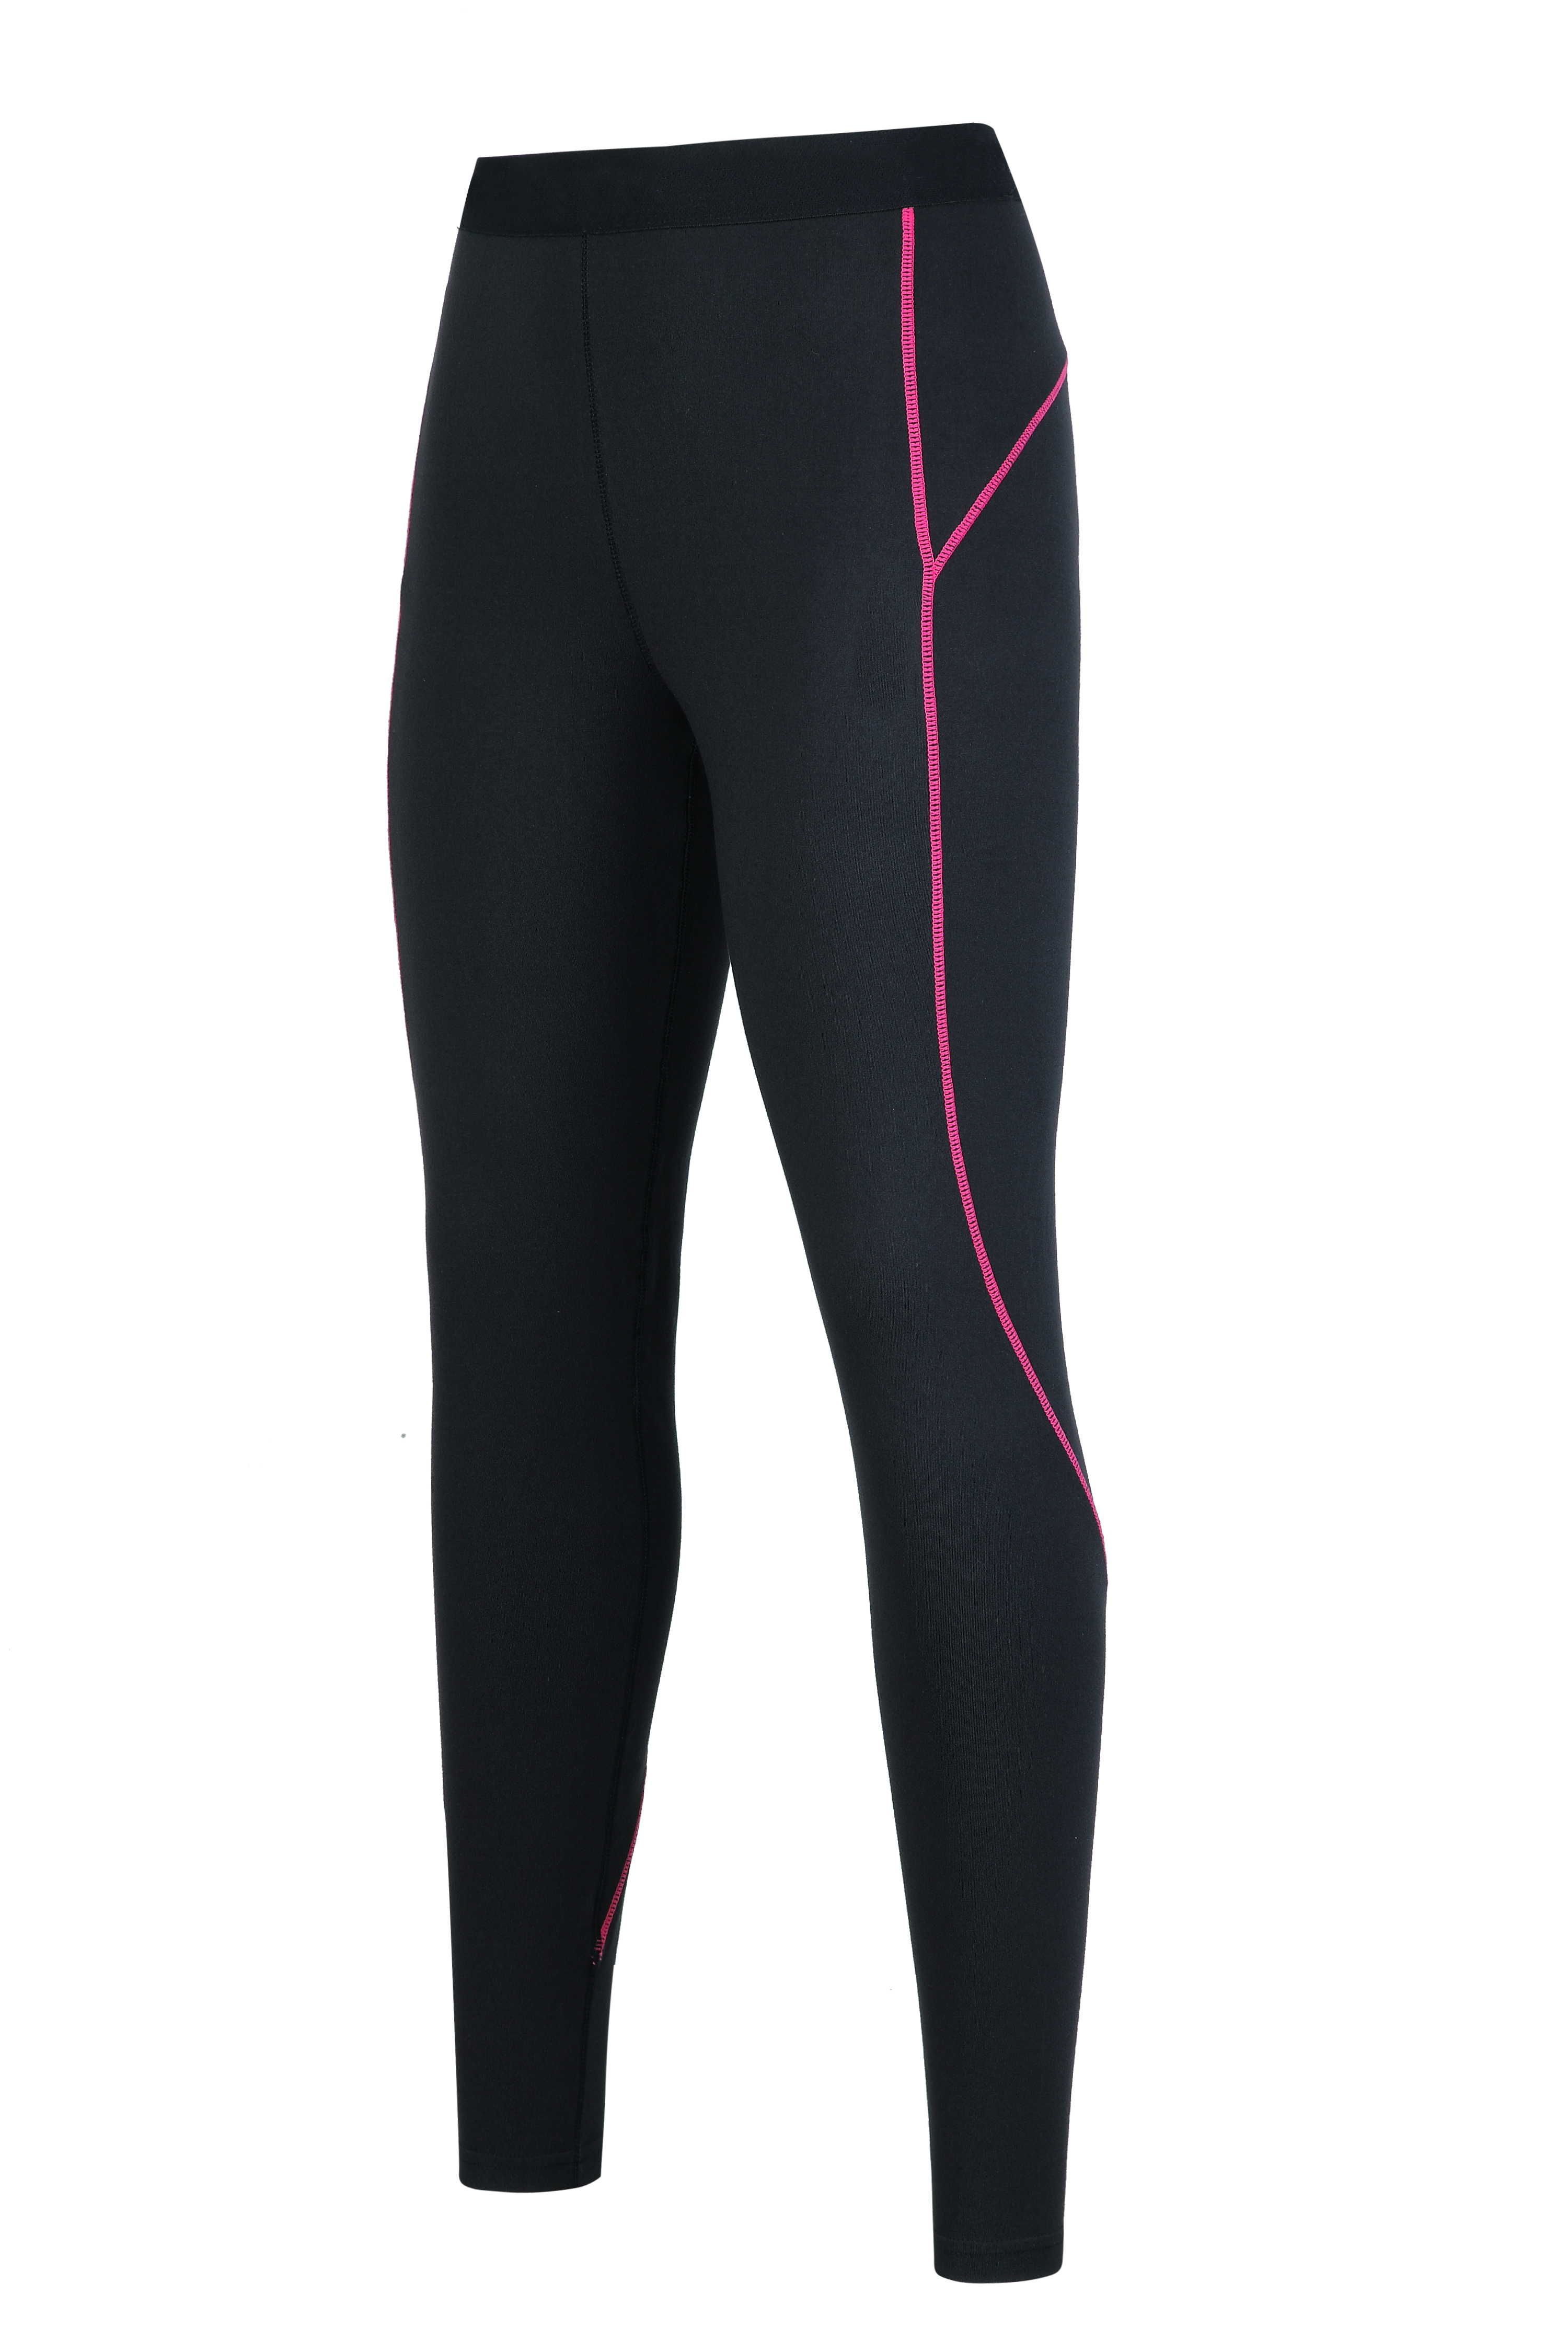 Women’s knitted flat lock compression pants.